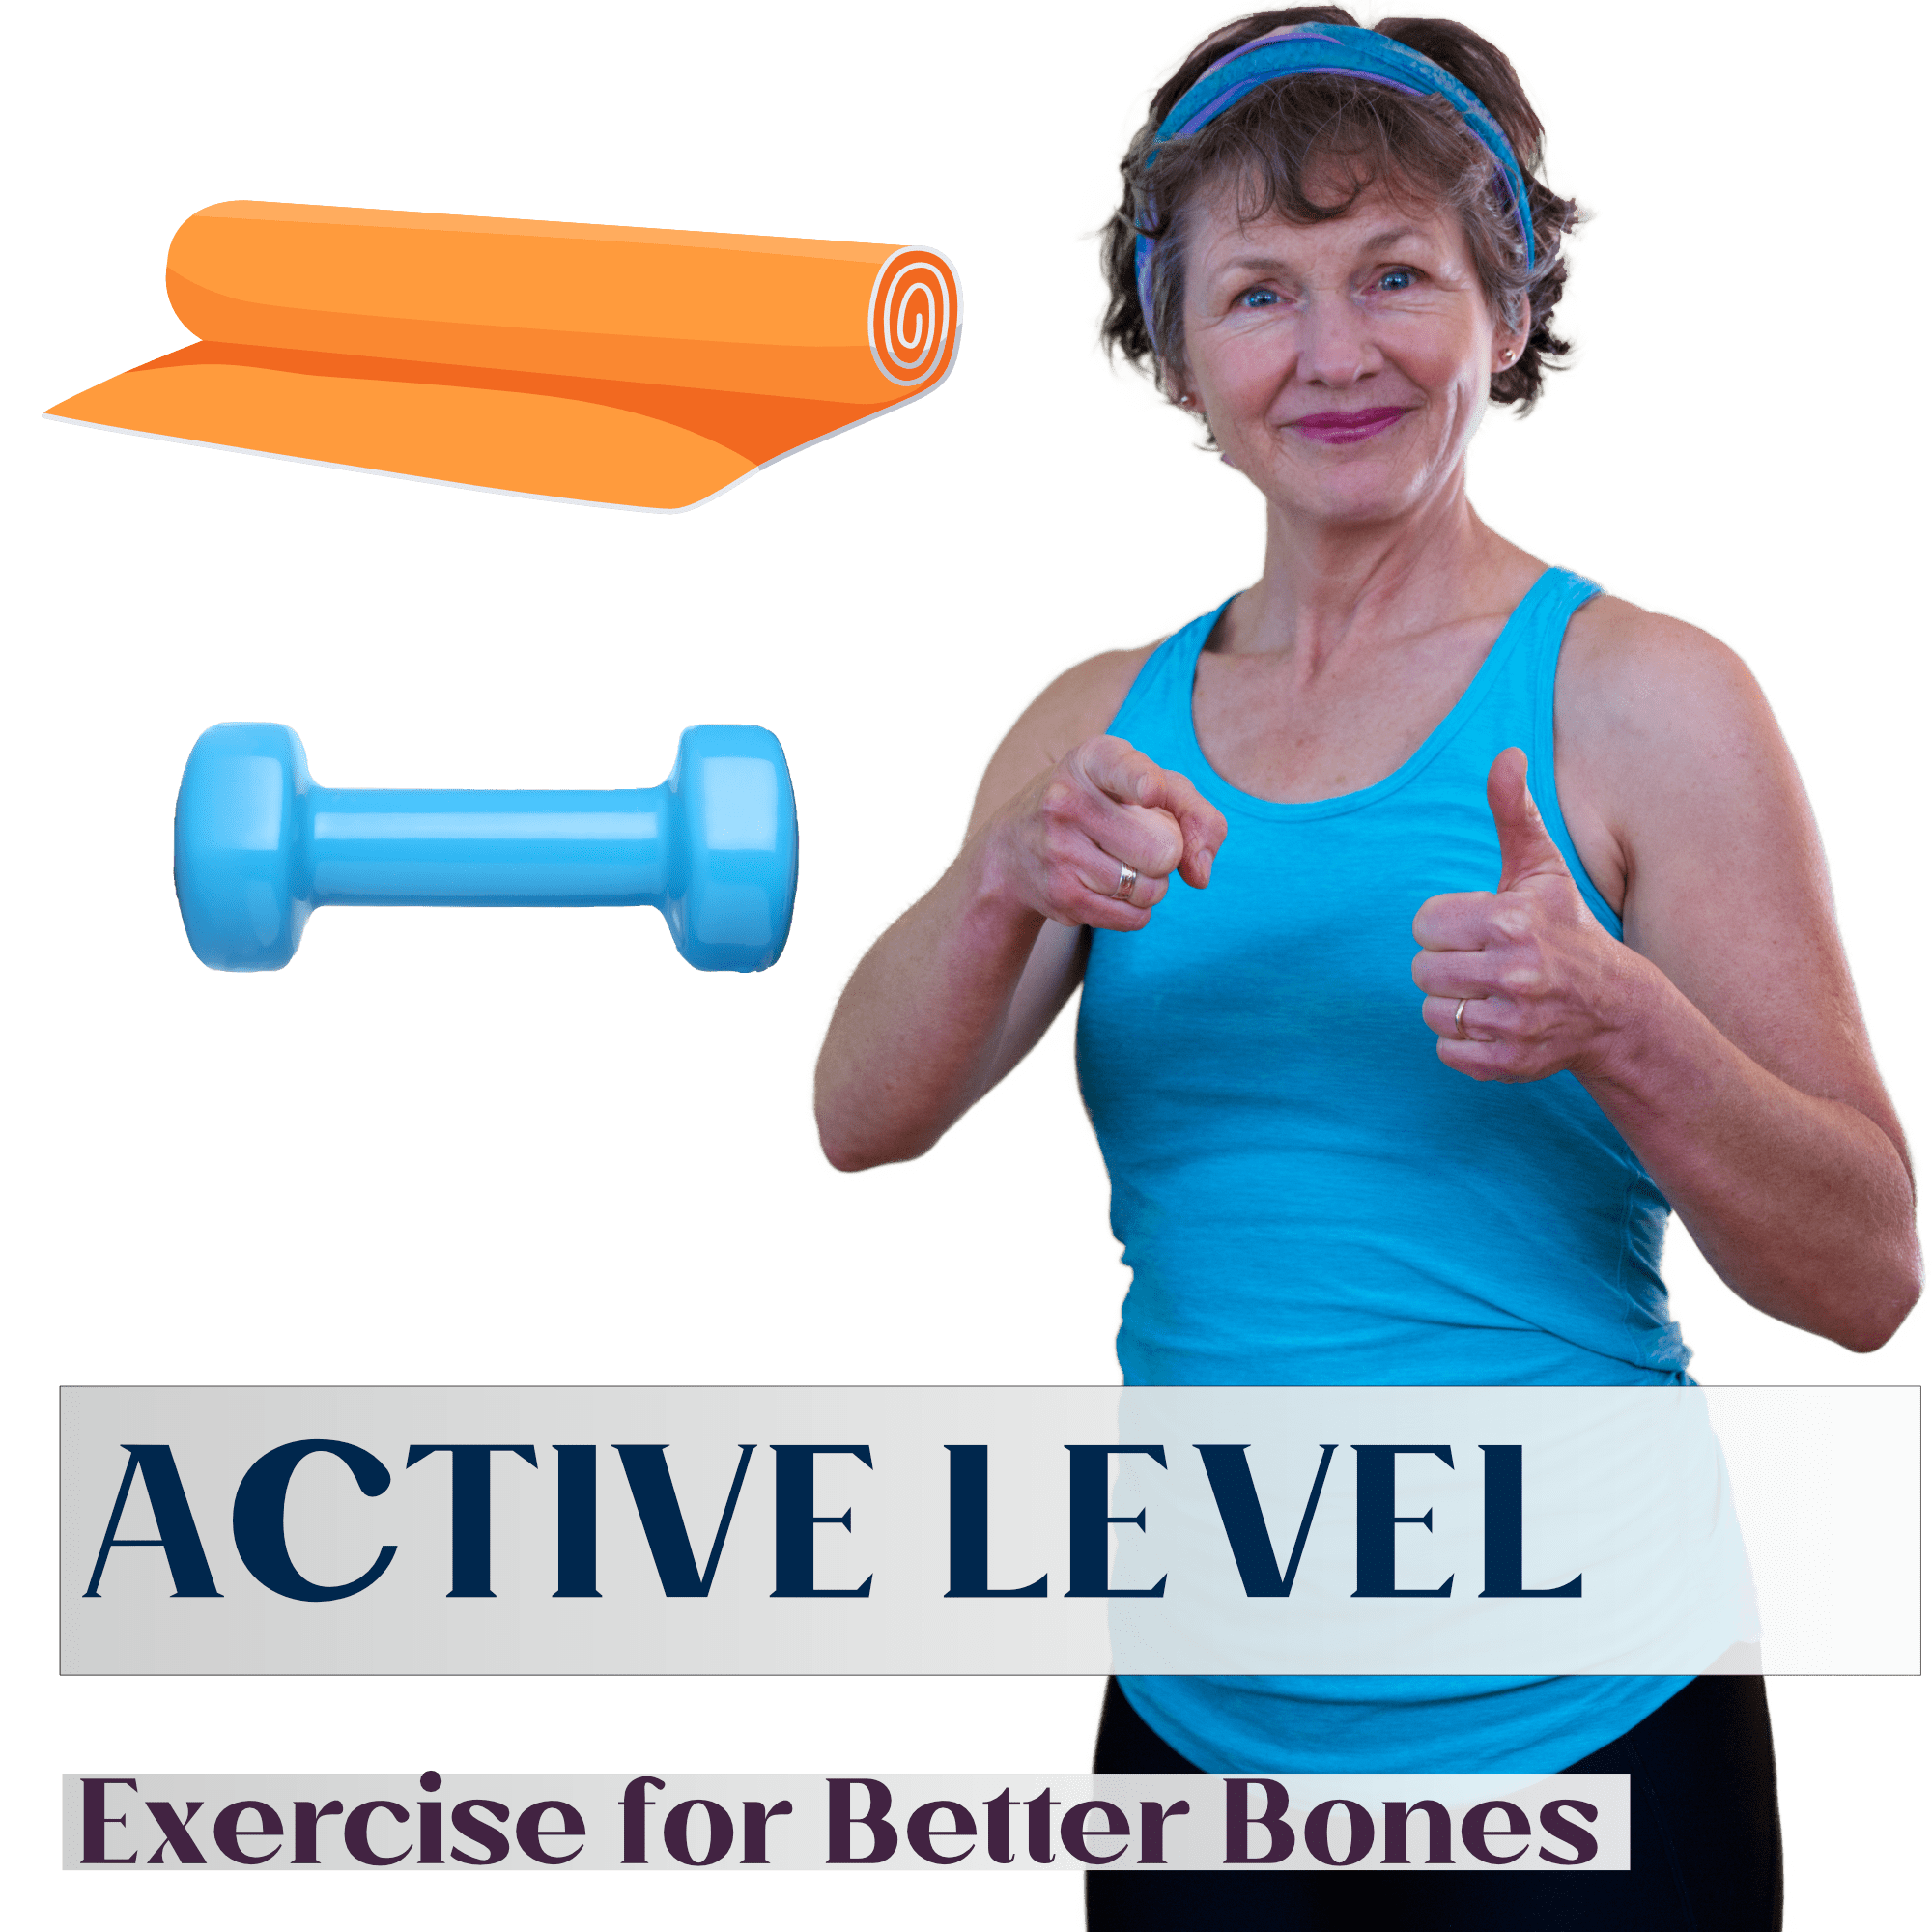 exercise equipment for active